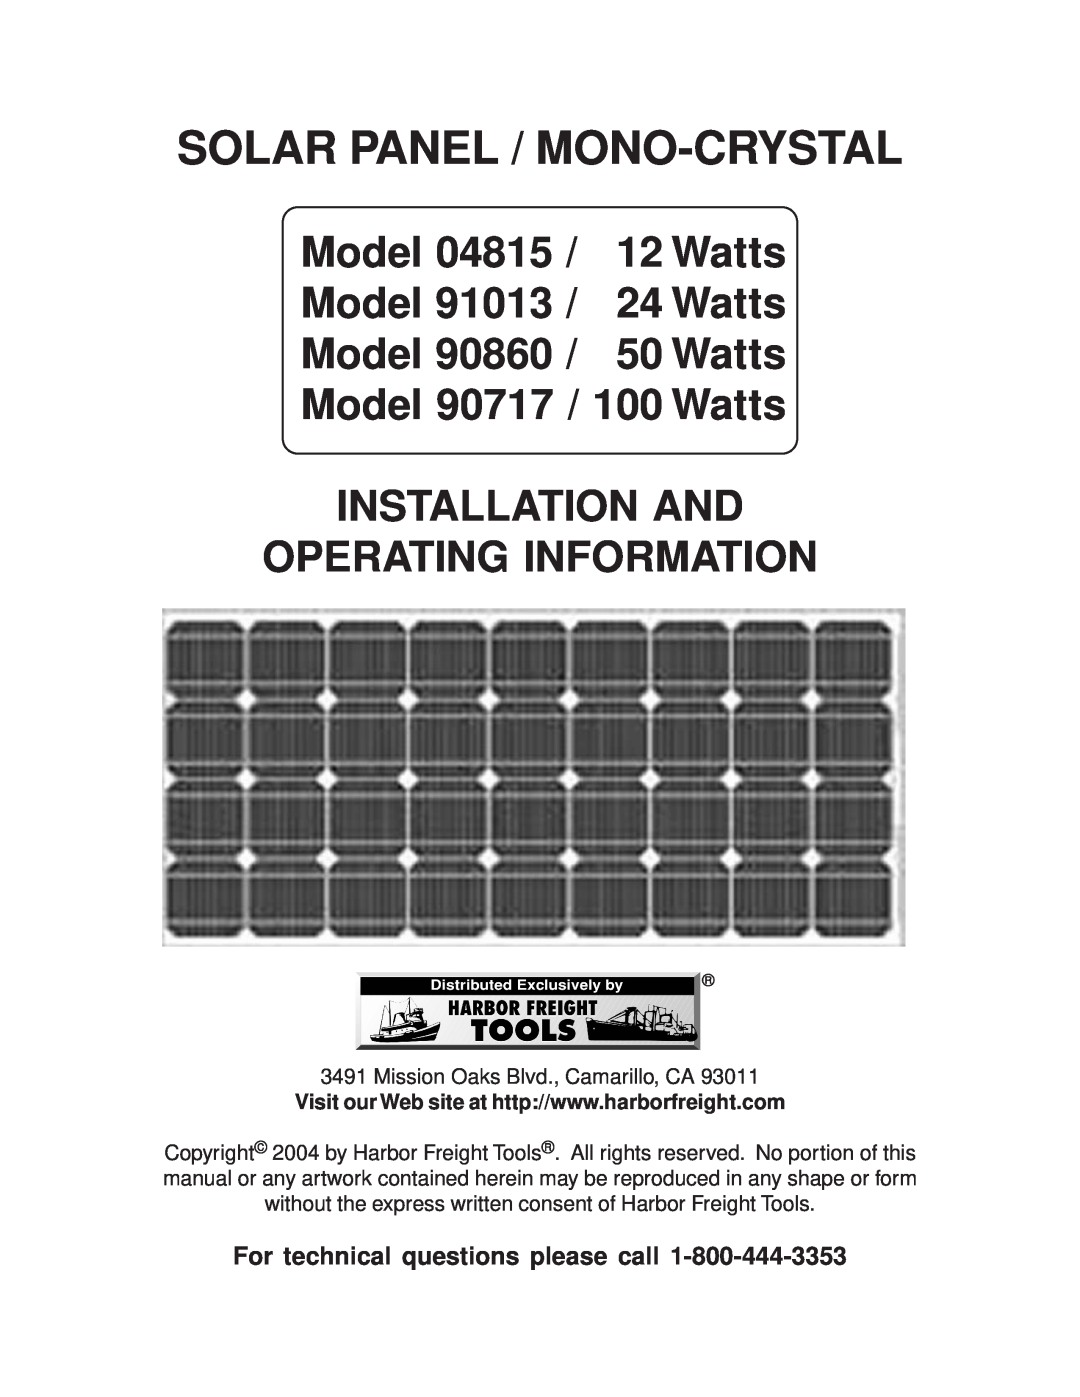 Harbor Freight Tools 91013, 90860 manual For technical questions please call, Solar Panel / Mono-Crystal, Model, Watts 